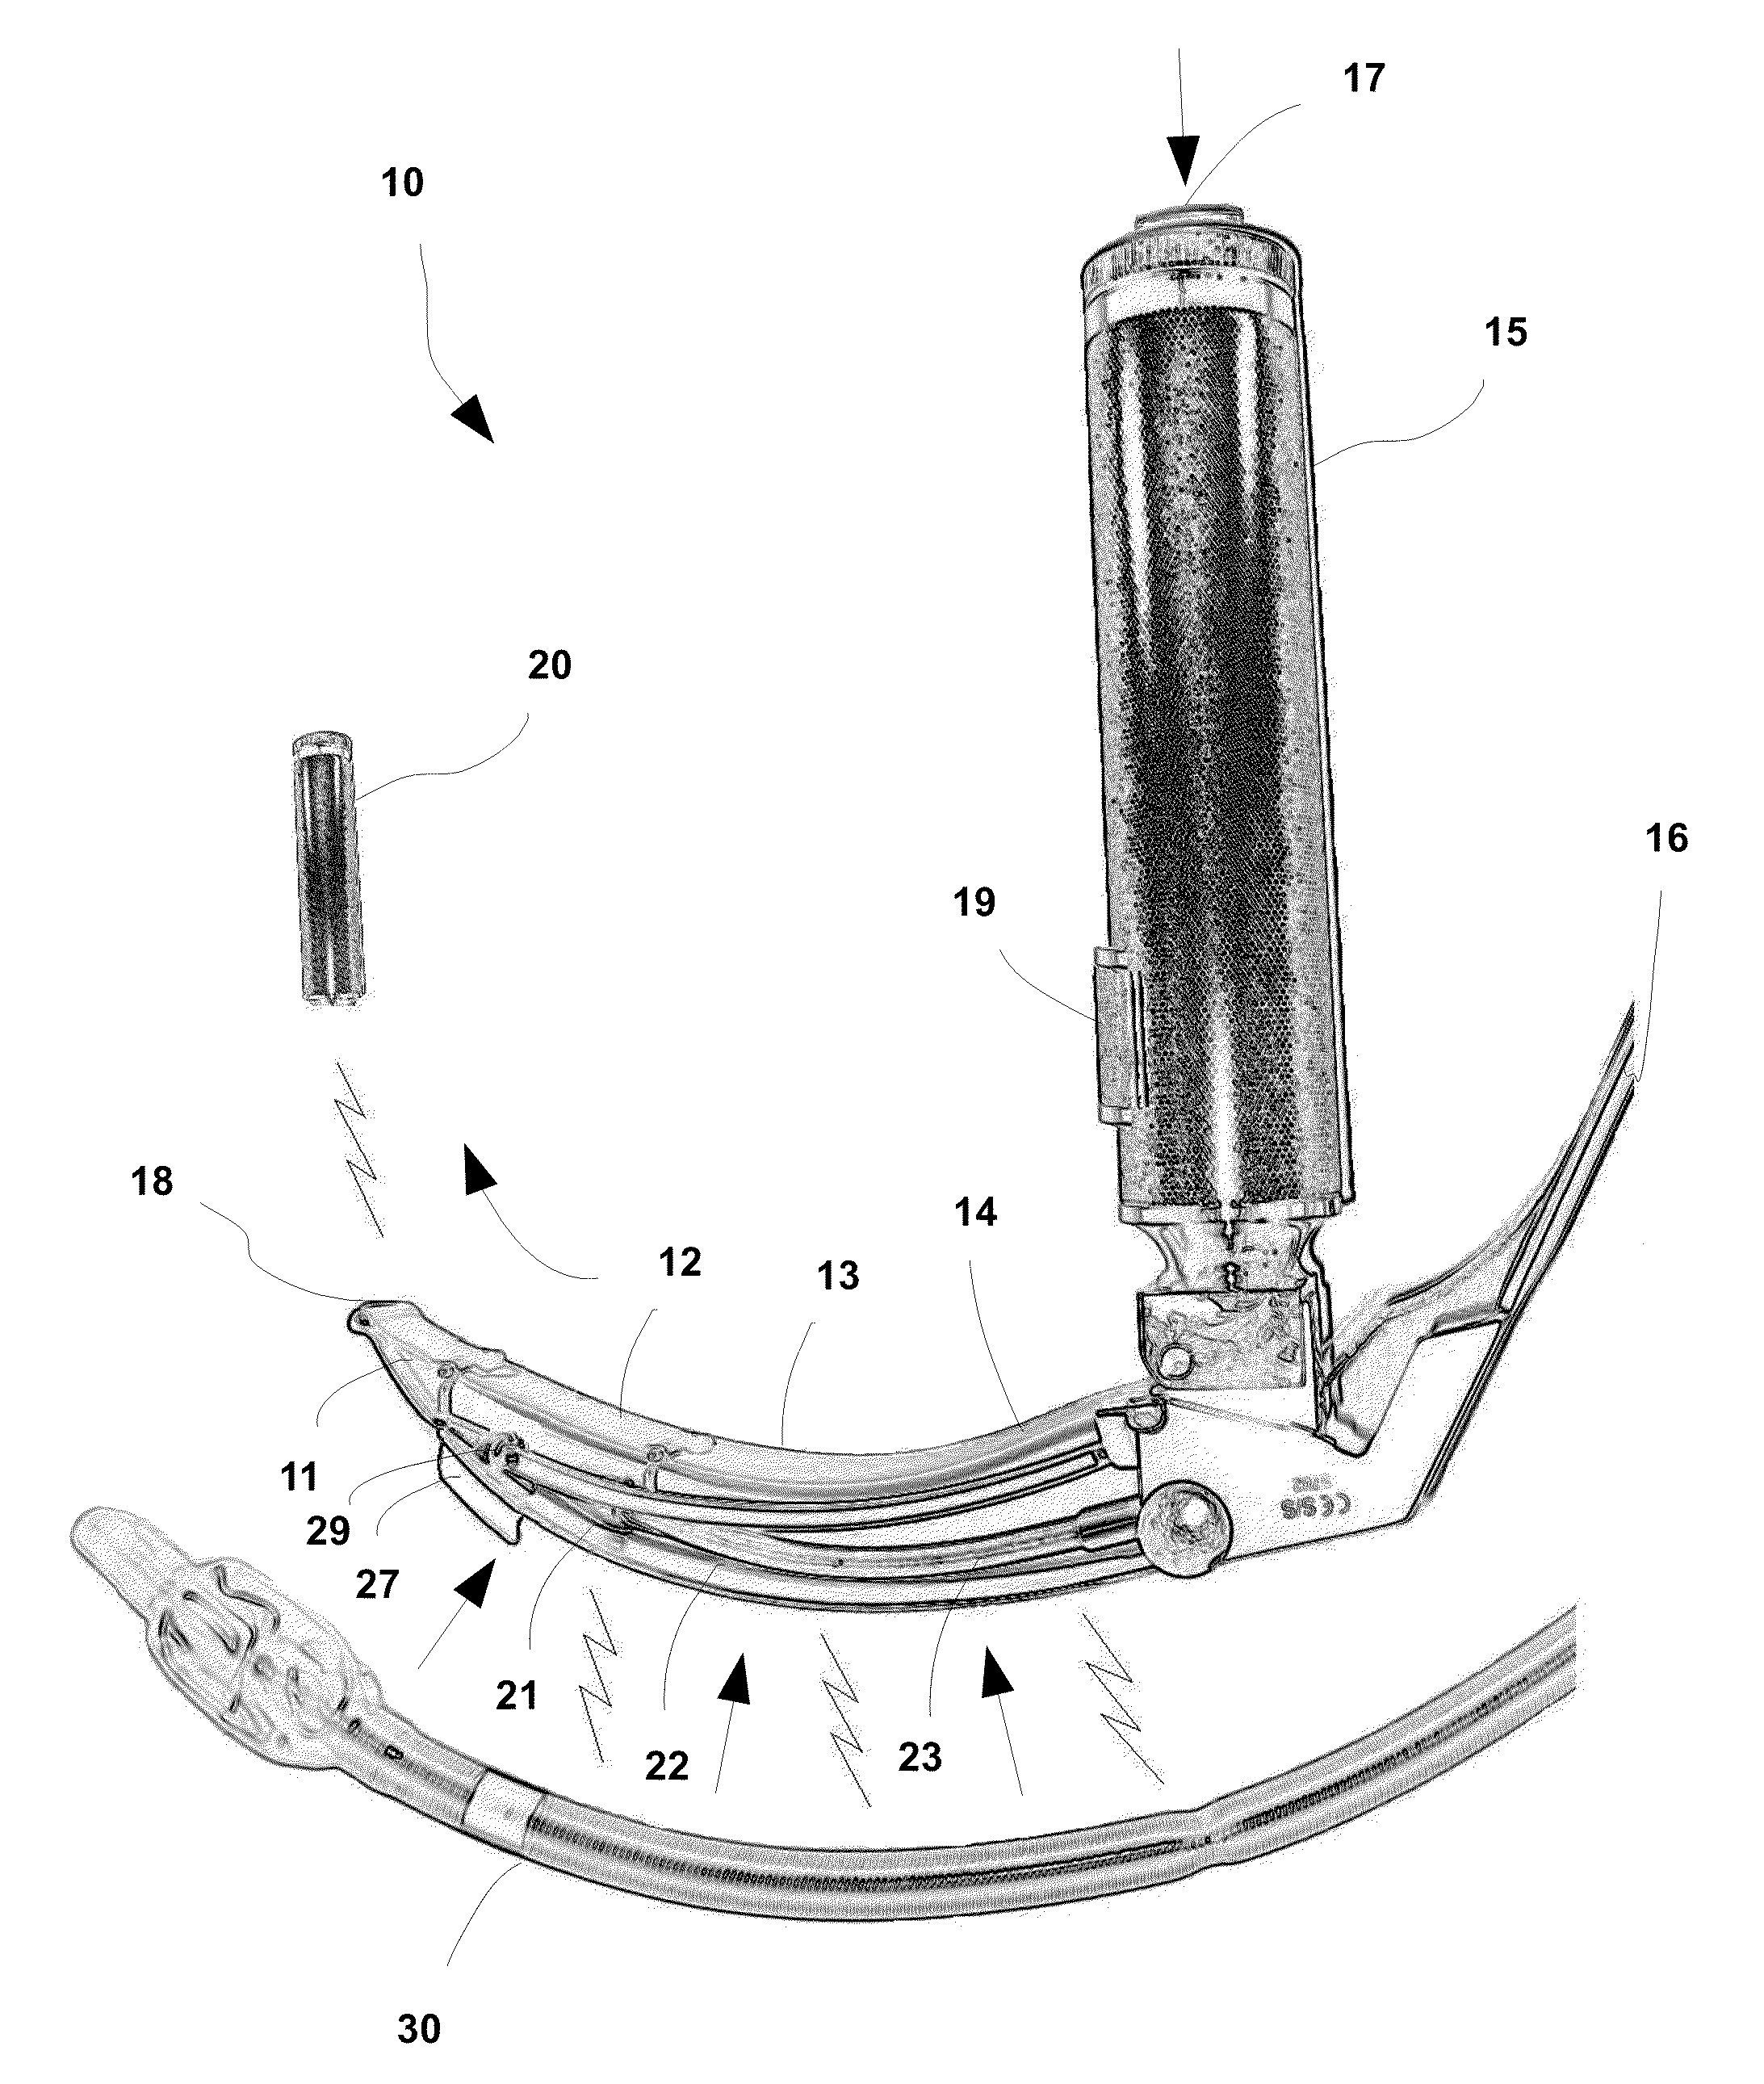 Laryngoscope, comprising a set of magnetic elements